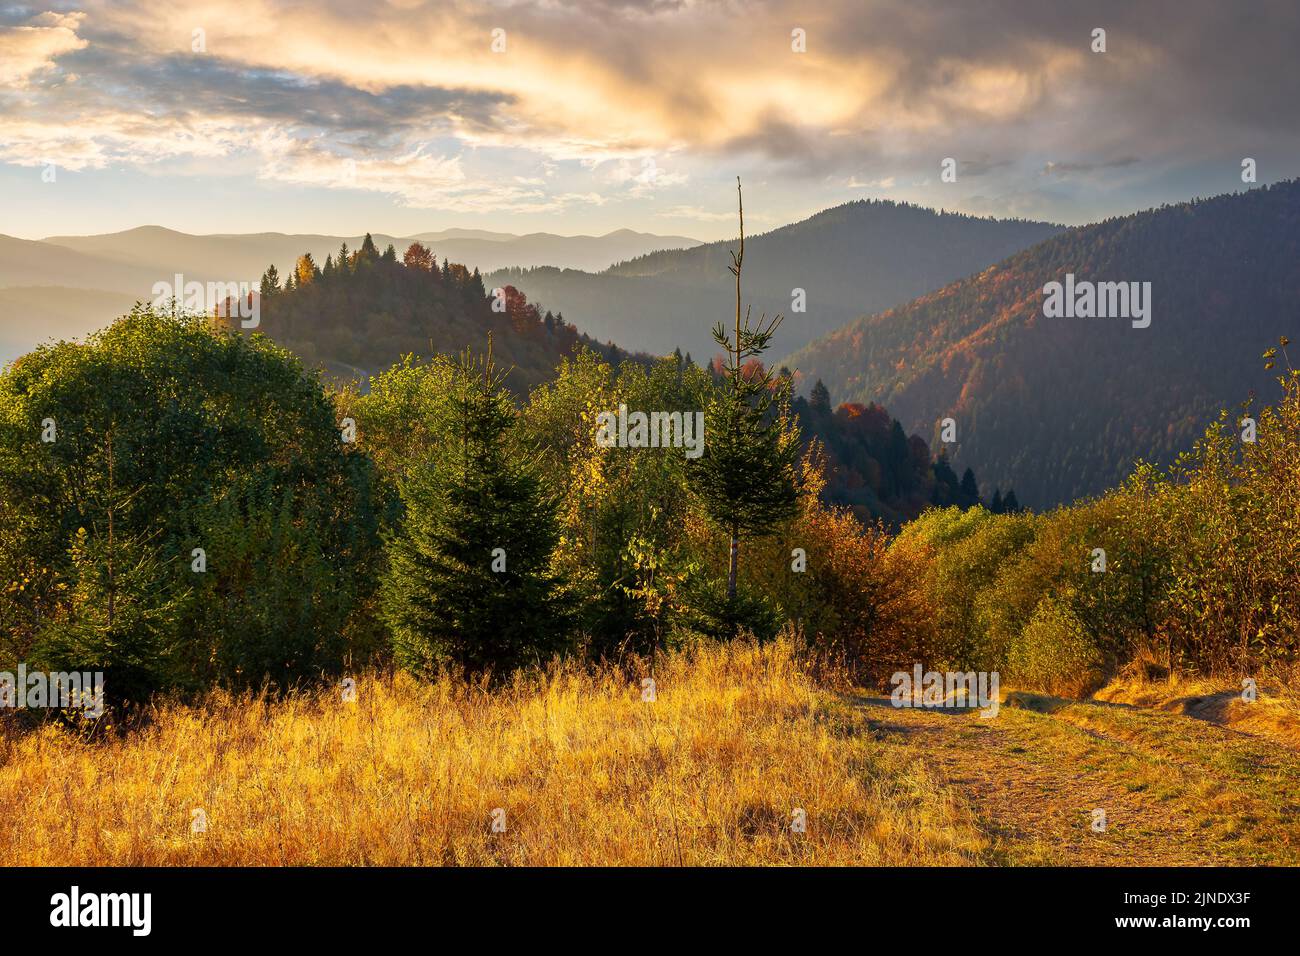 mountainous countryside in autumn. forest in colorful foliage on the hills. mountain range in the distance beneath a sky with beautiful cloudscape. wo Stock Photo